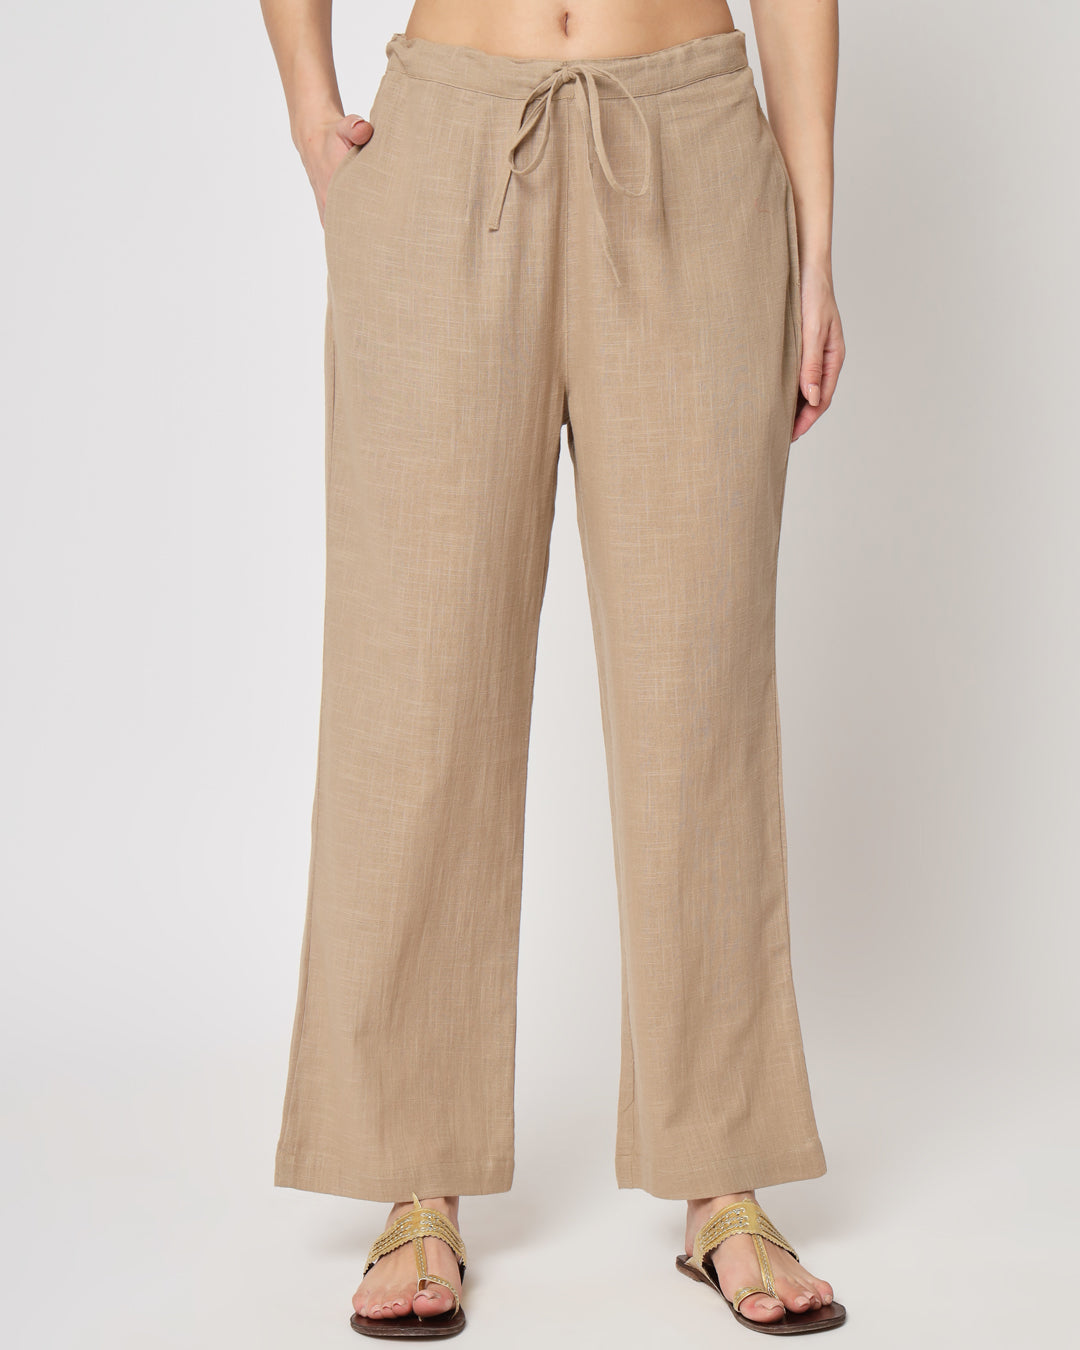 Combo: Beige & Classic Red Straight Pants- Set of 2